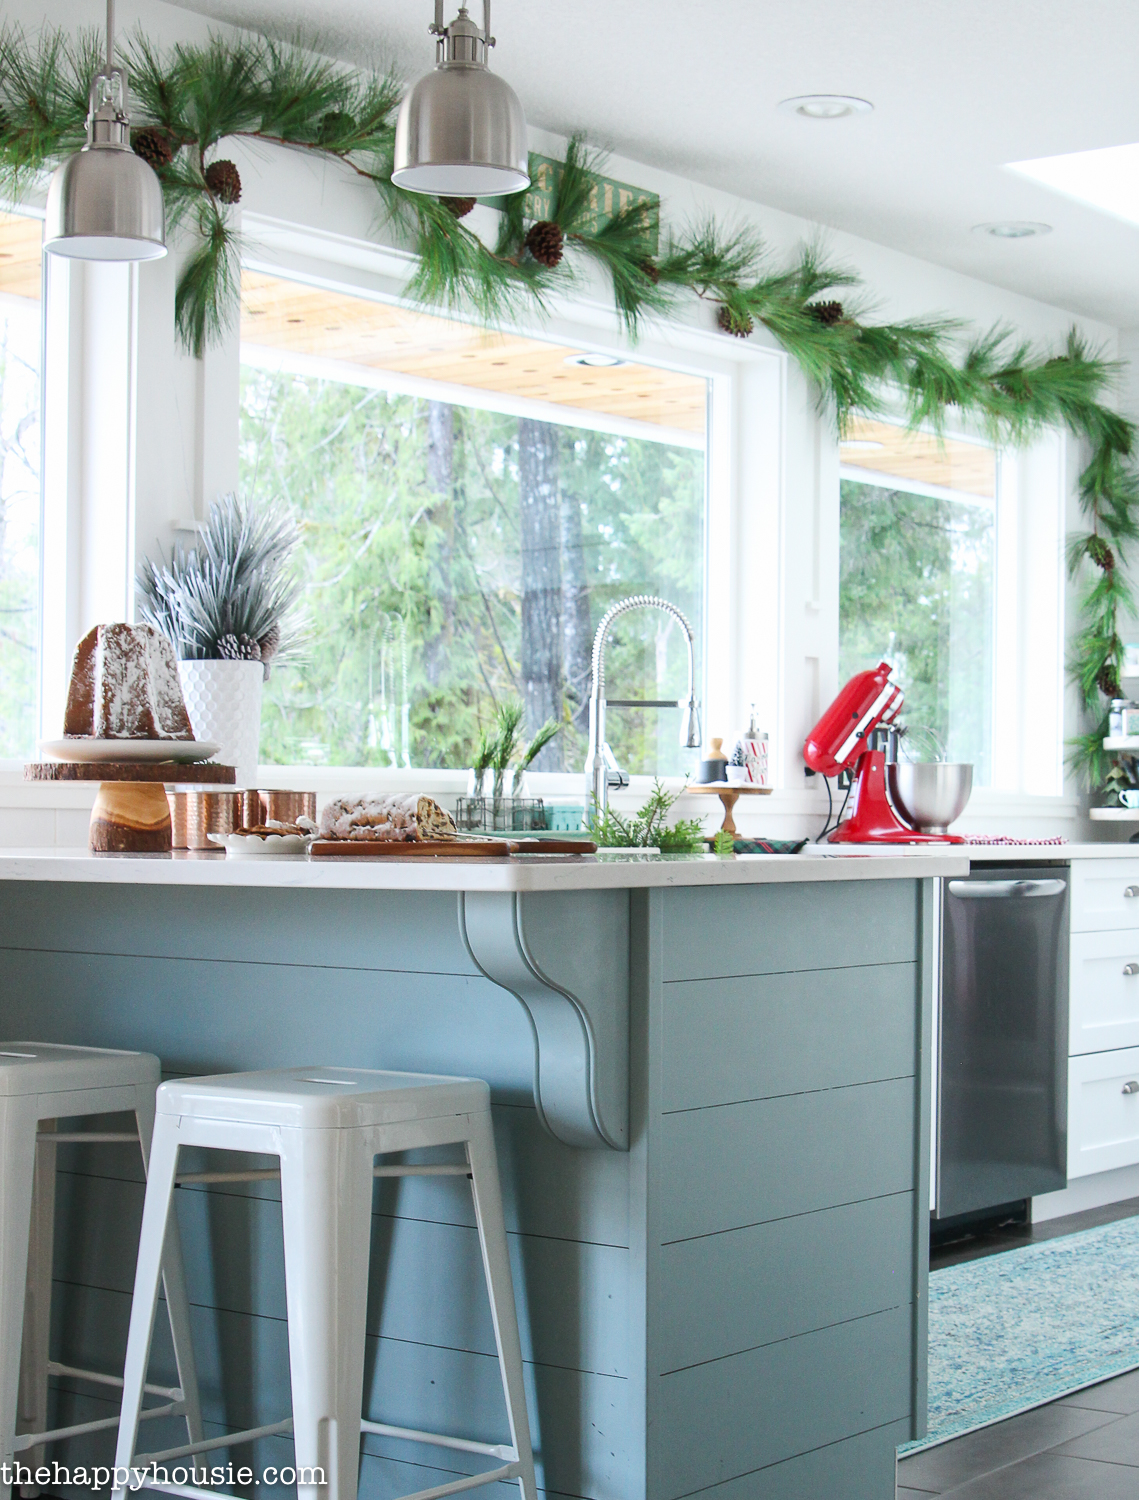 The white and blue kitchen decorated for Christmas.